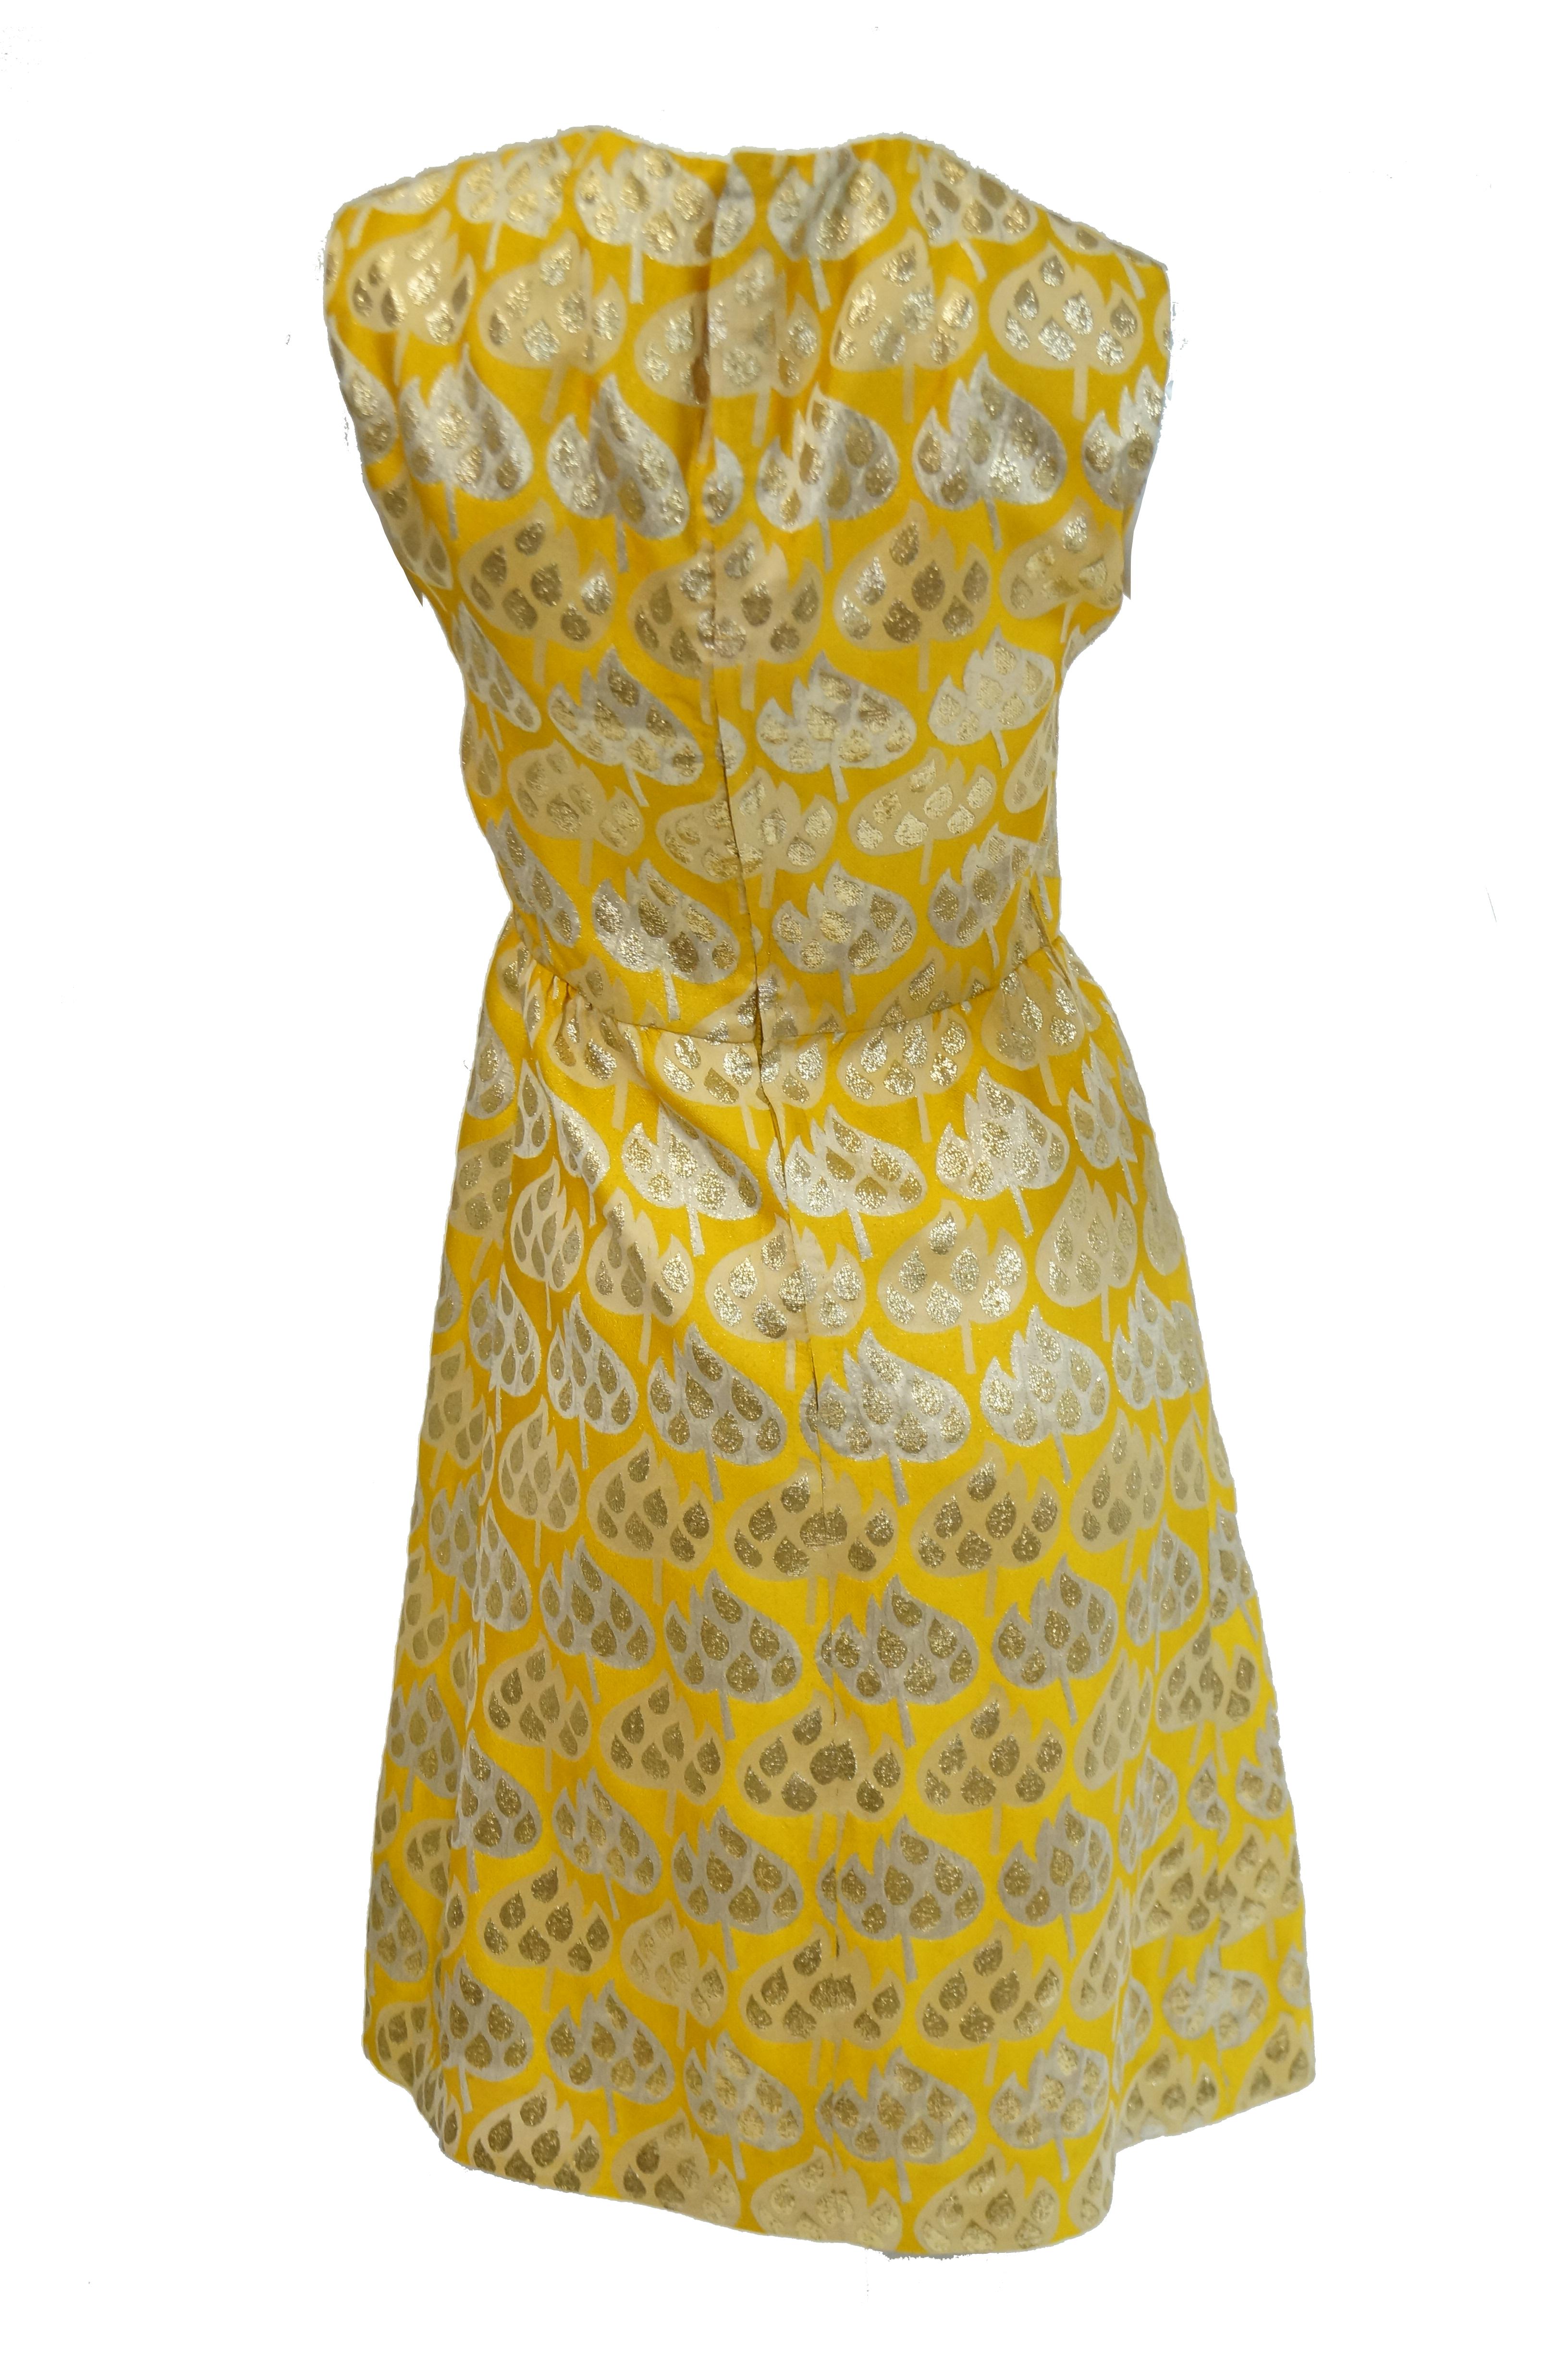 Women's 1960s Mollie Parnis Gold and Yellow Leaf Print Cocktail Dress For Sale